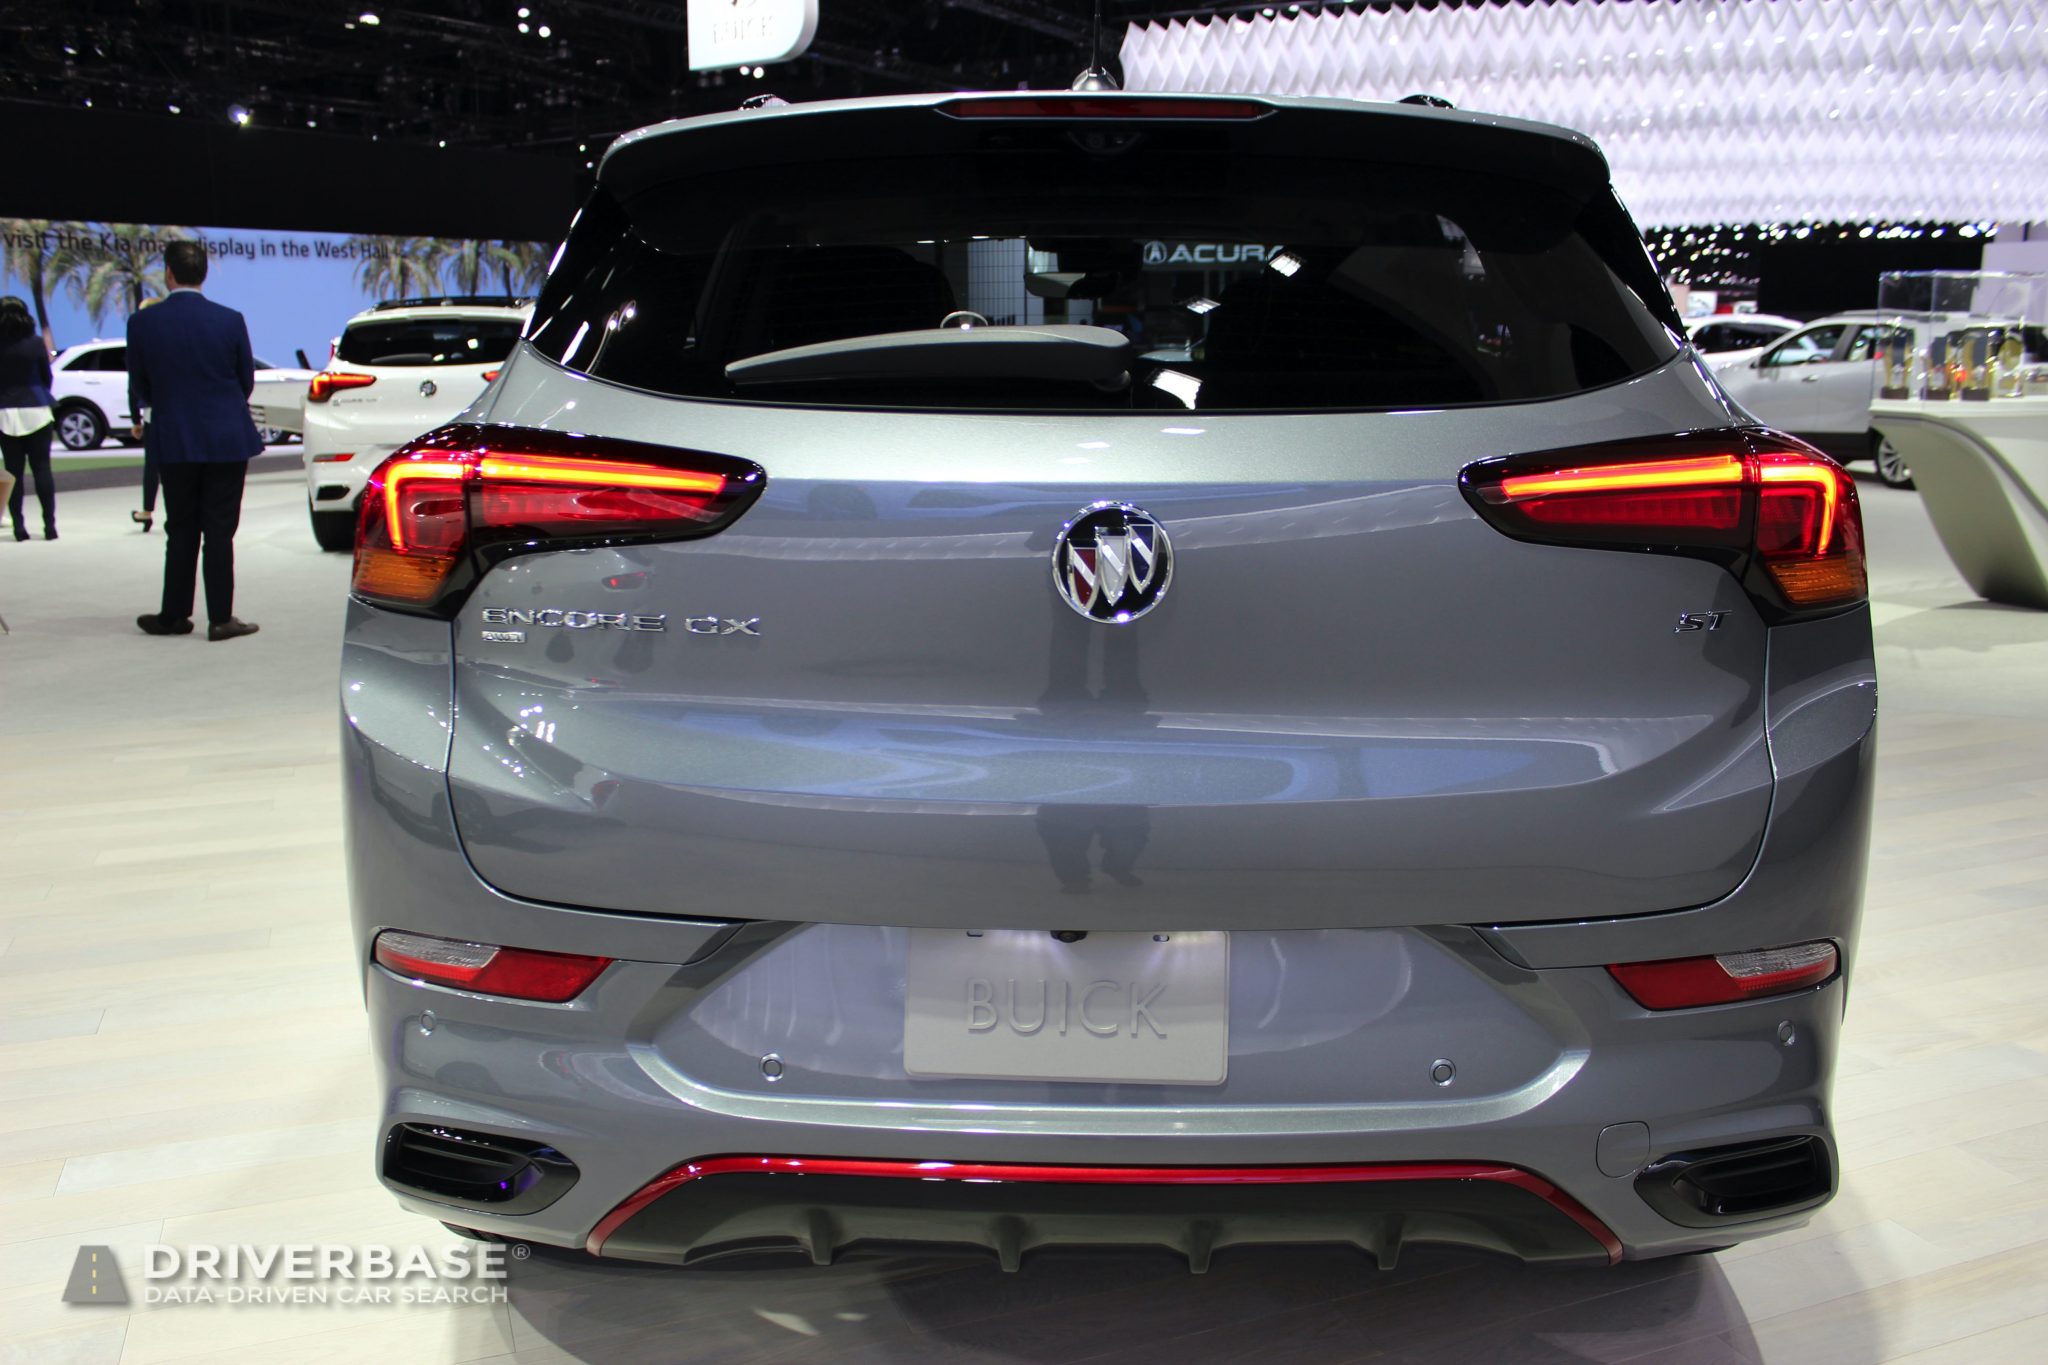 2020 Buick Encore at the 2019 Los Angeles Auto Show